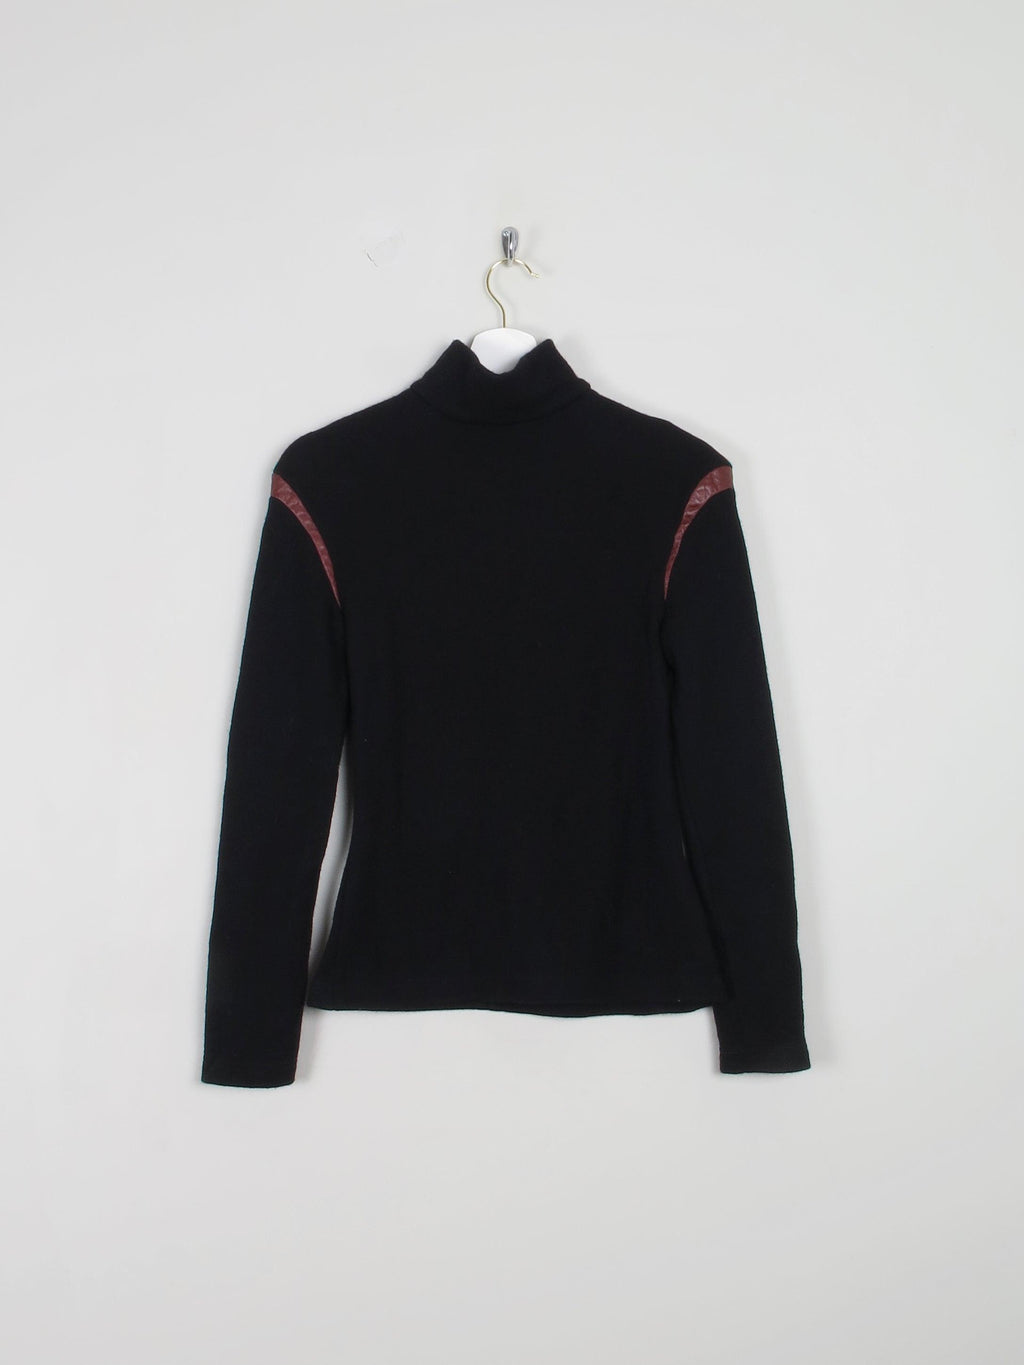 Women's Black Stretchy Wool Polo Neck Top With Leather Trim XS/S - The Harlequin